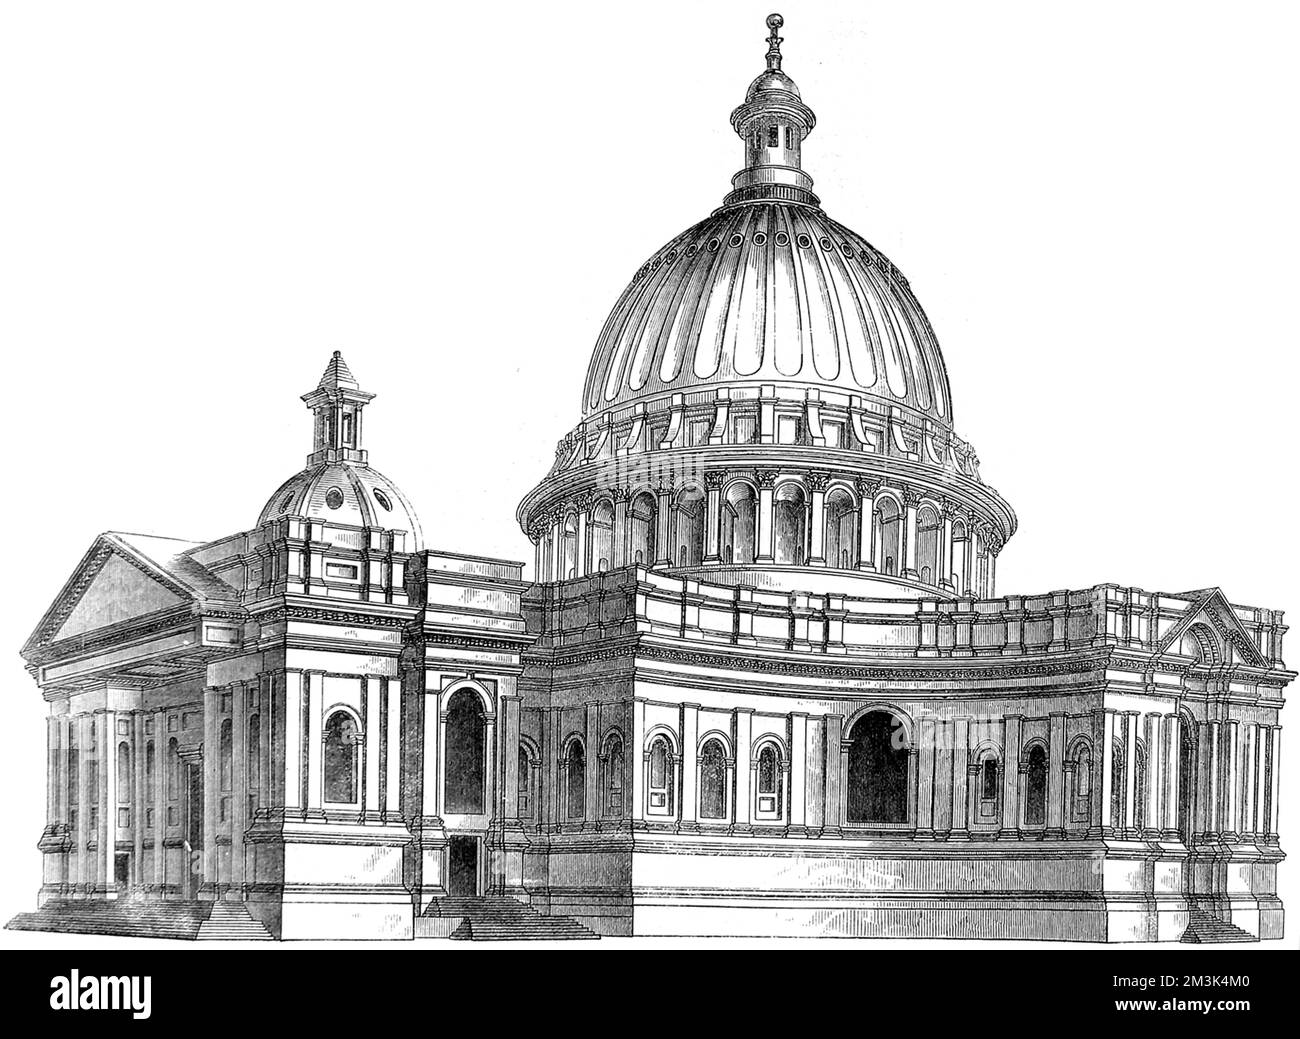 Sir Christopher Wren's original model (and design) for St. Paul's Cathedral, London.   This model was on display in 1865, when it was sketched for the 'Illustrated London News'.     Date: 1865 Stock Photo